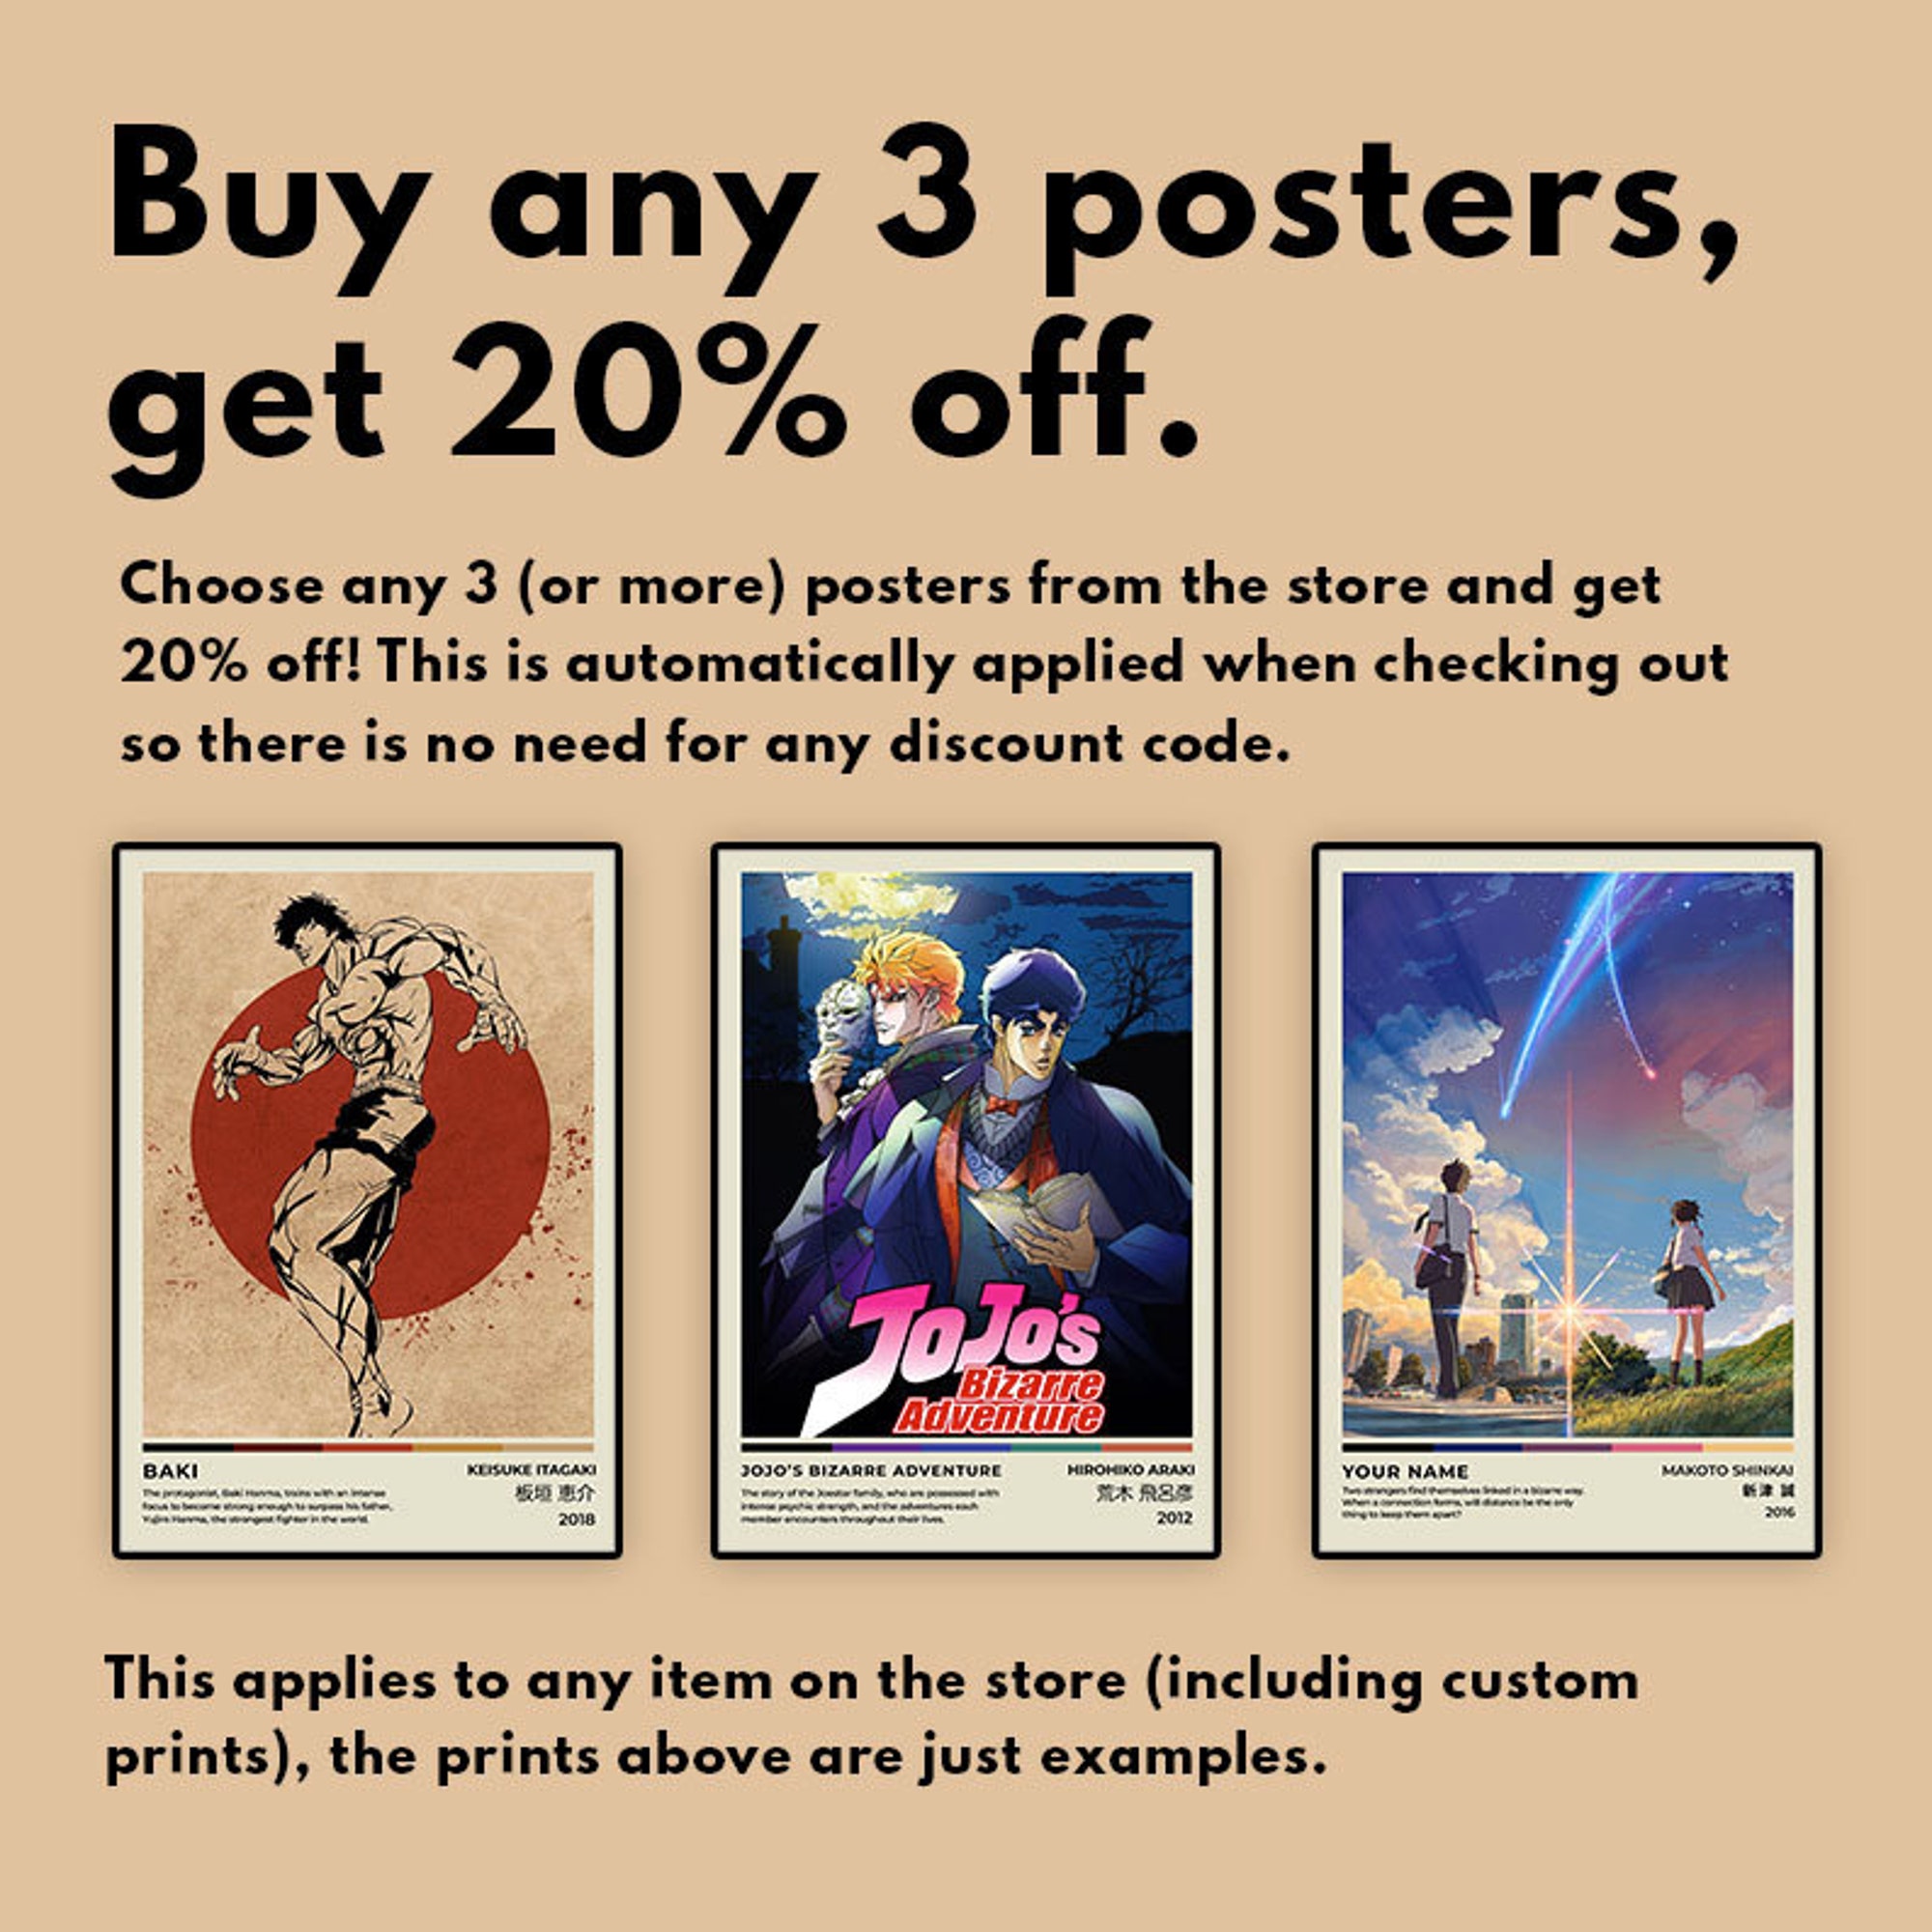 Discover The Weeknd Posters - Trilogy Poster - Album Cover Premium Matte Vertical Poster